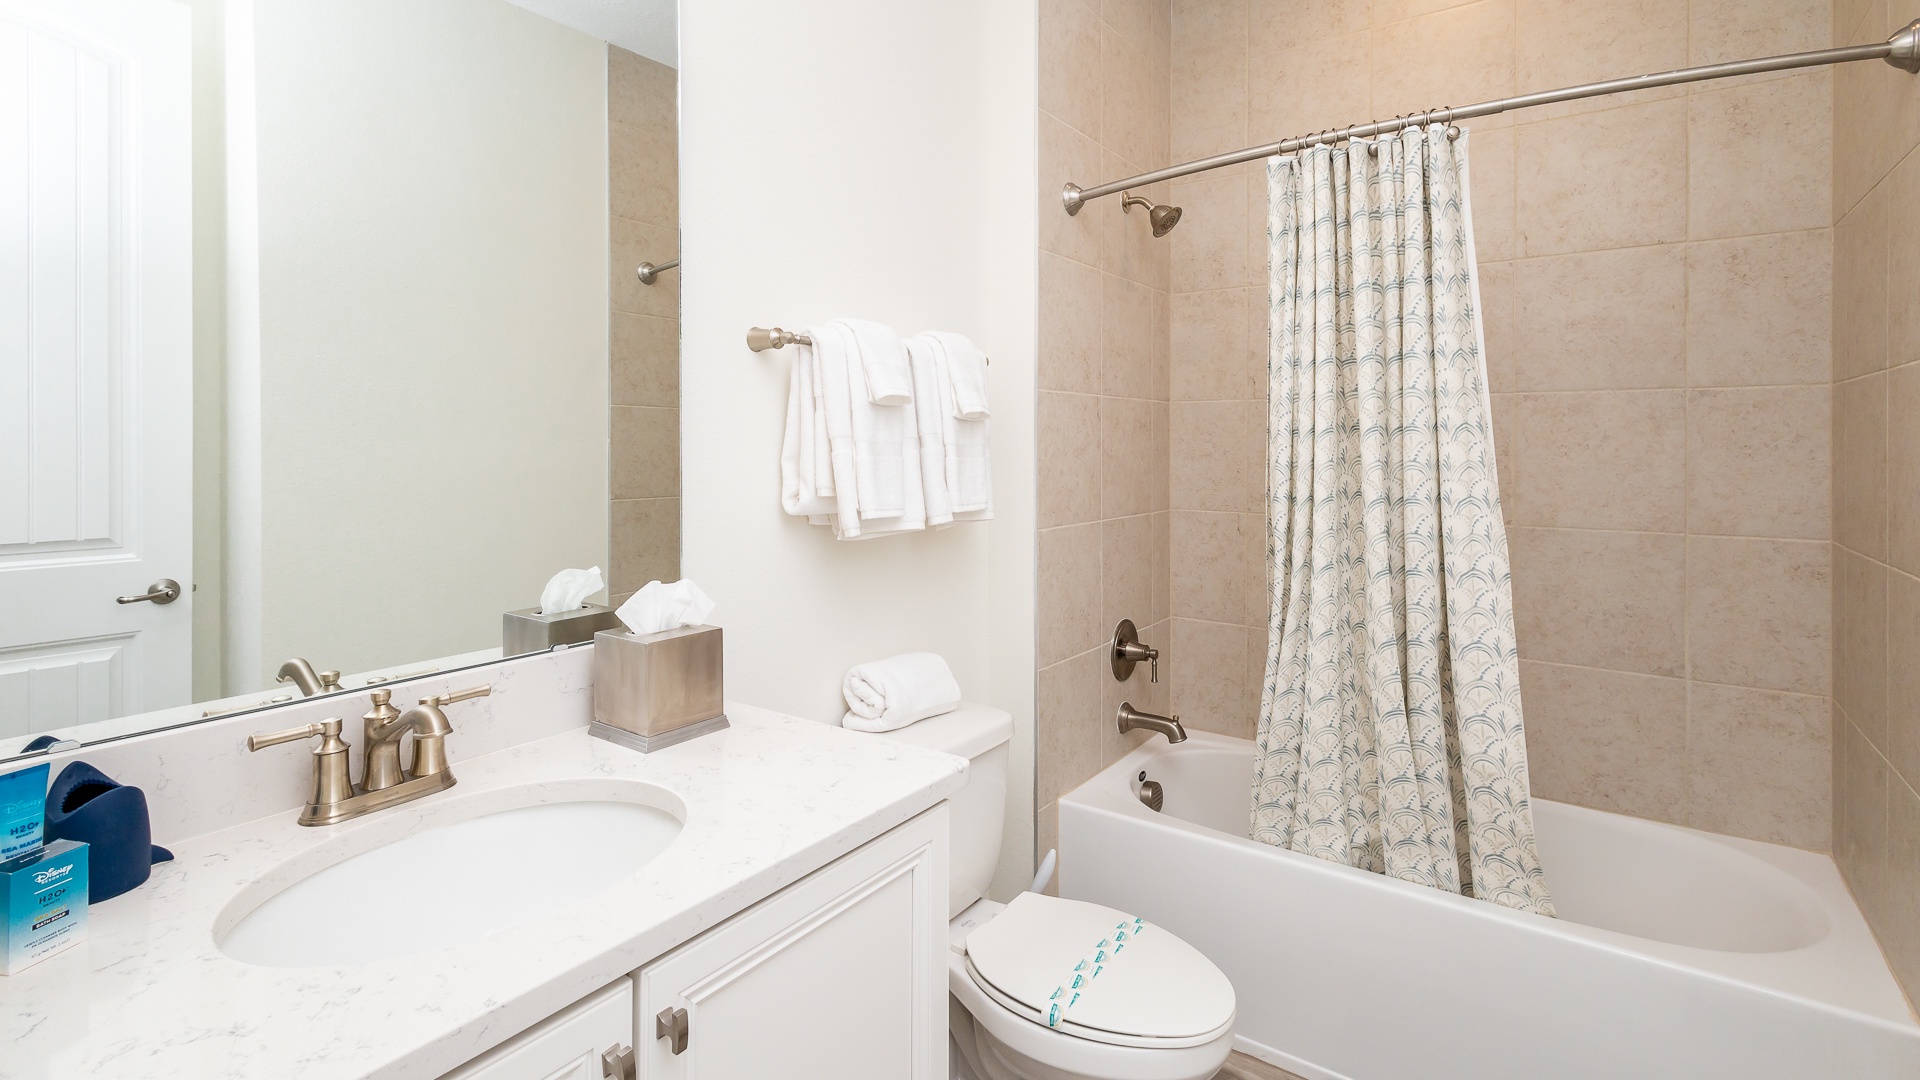 The shared 2nd floor full bath includes a single vanity & shower/tub combo